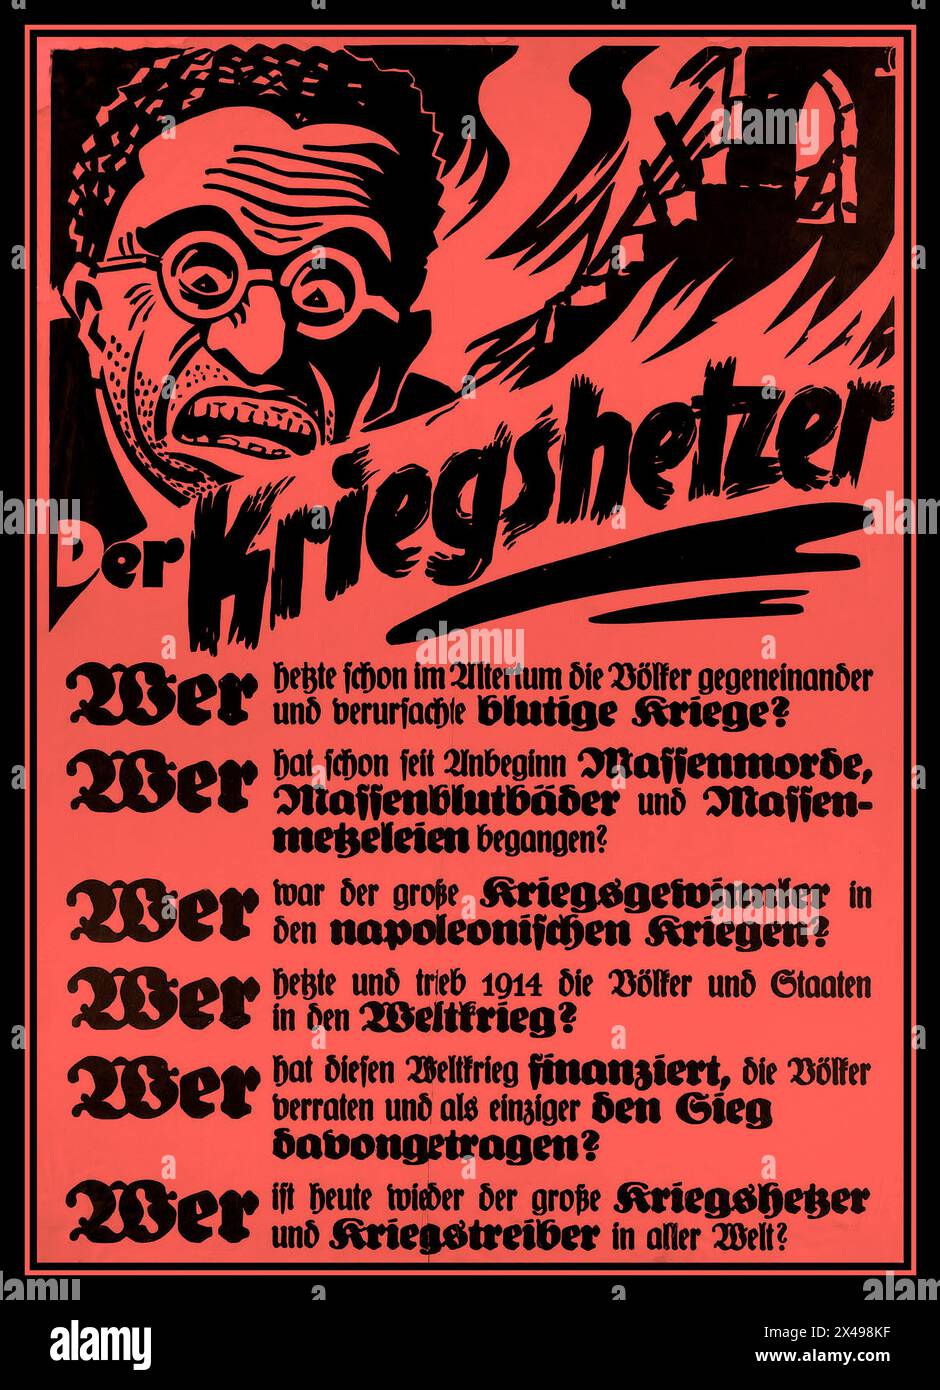 Der Kriegshetzer 'THE WARMONGER' anti semitic anti jewish Nazi Propaganda blaming the Jewish people for making war over the years including the Napoleonic Wars and many others as listed. Nazi Germany Date:1939-1945 Stock Photo